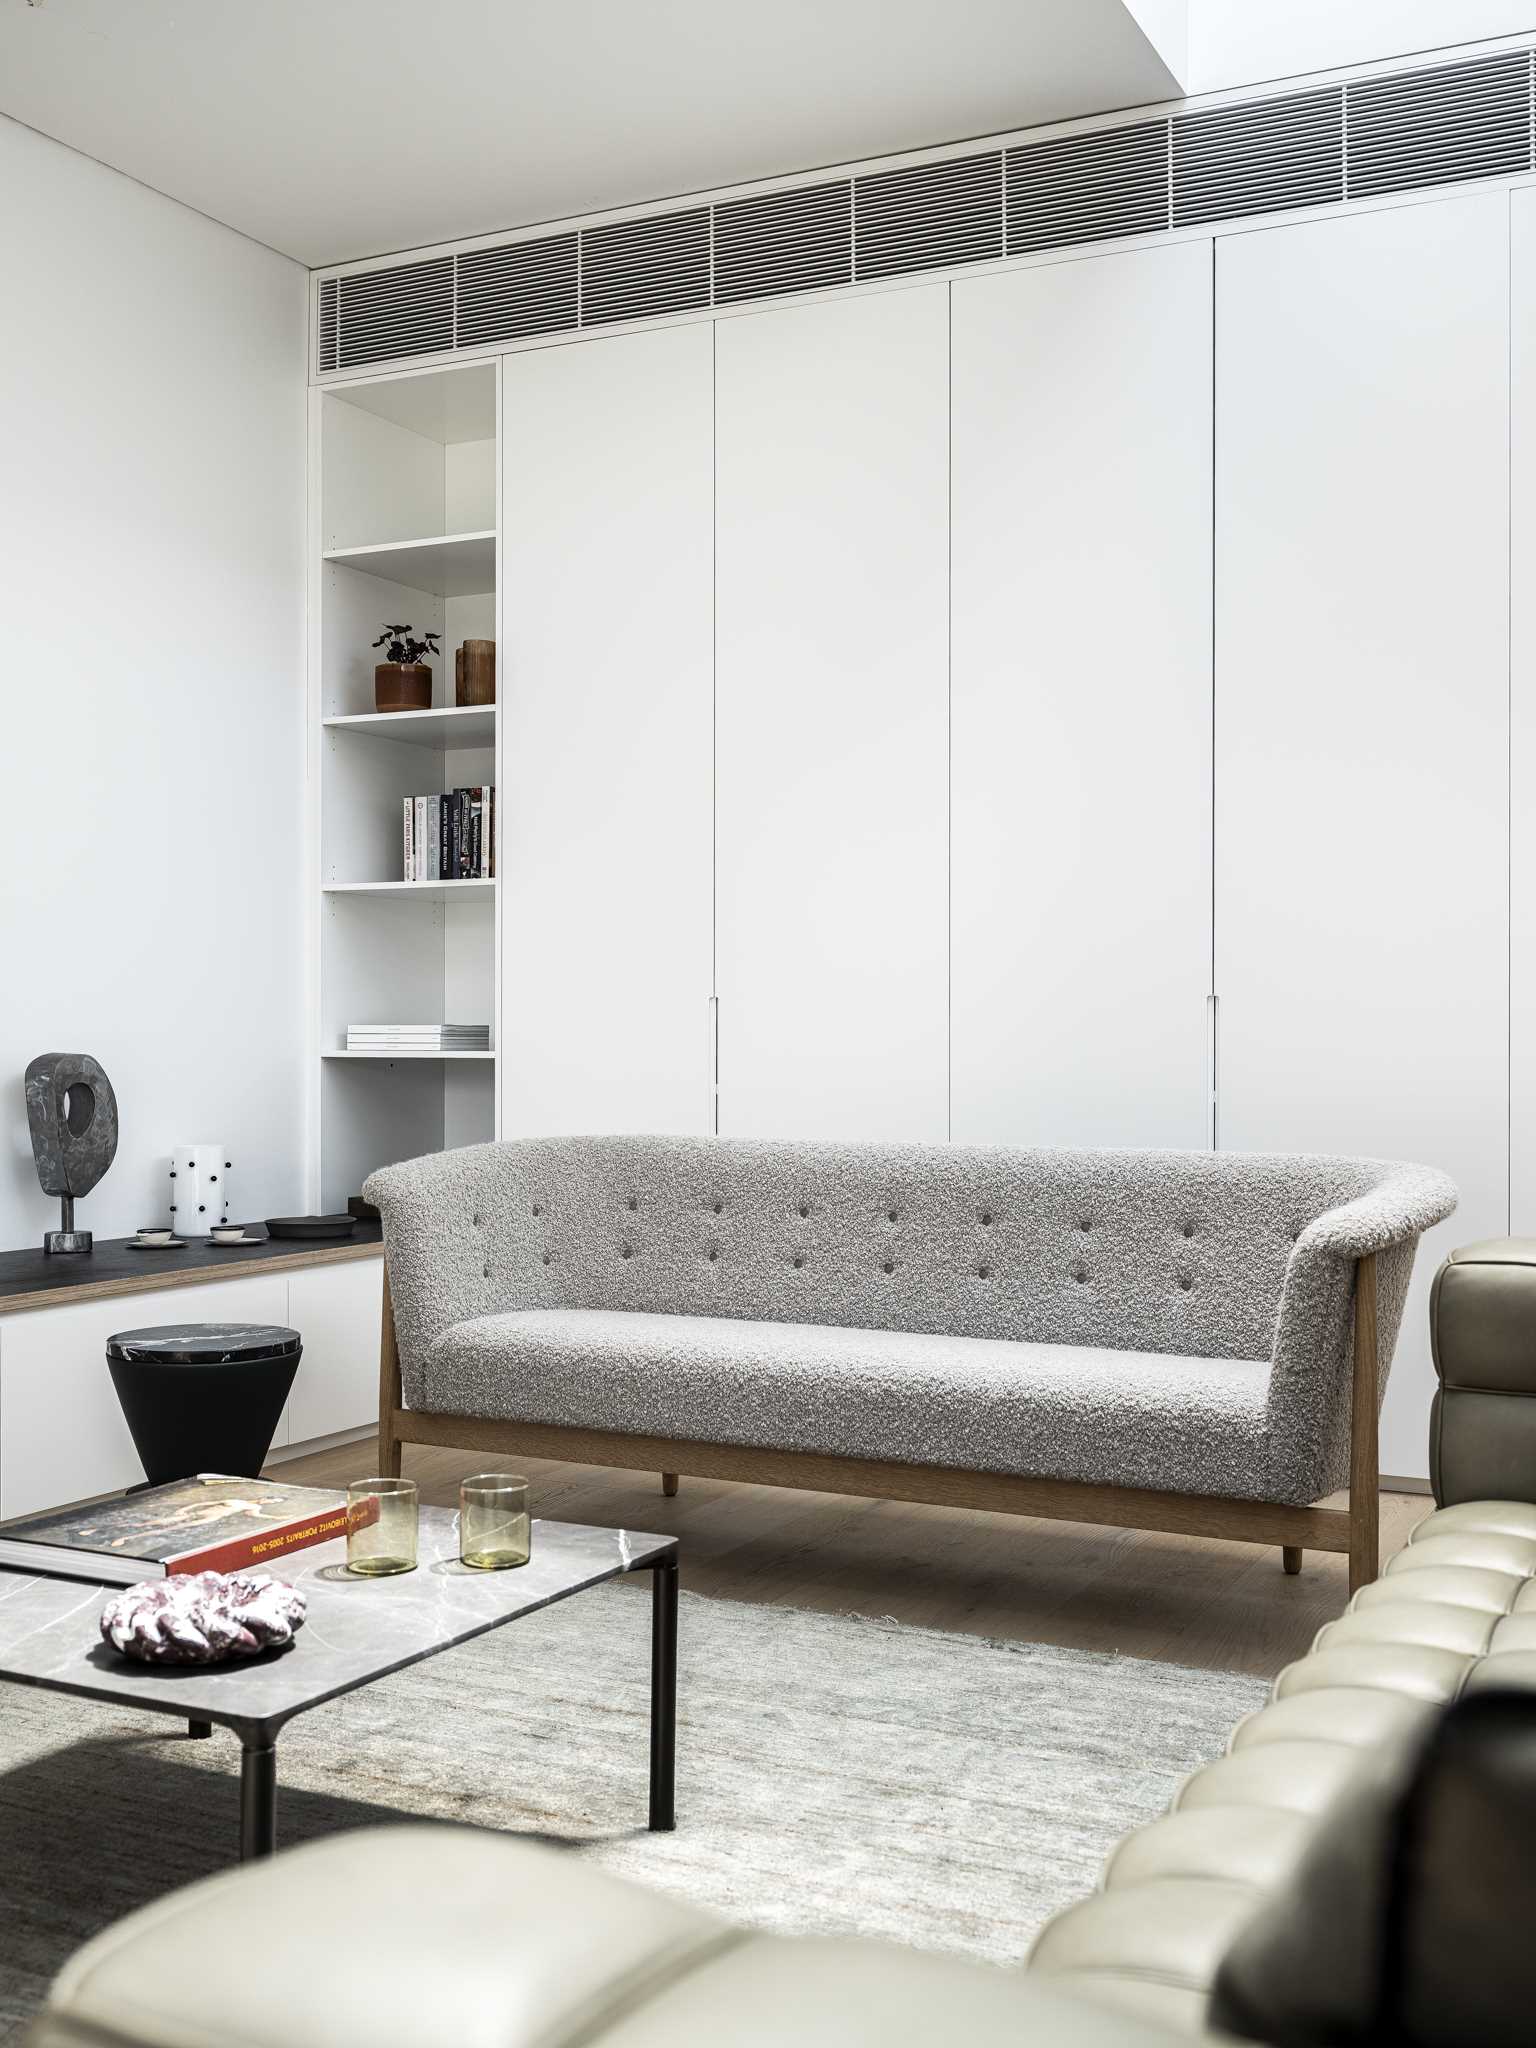 A modern living room with a wall full of storage cabinets and shelves.